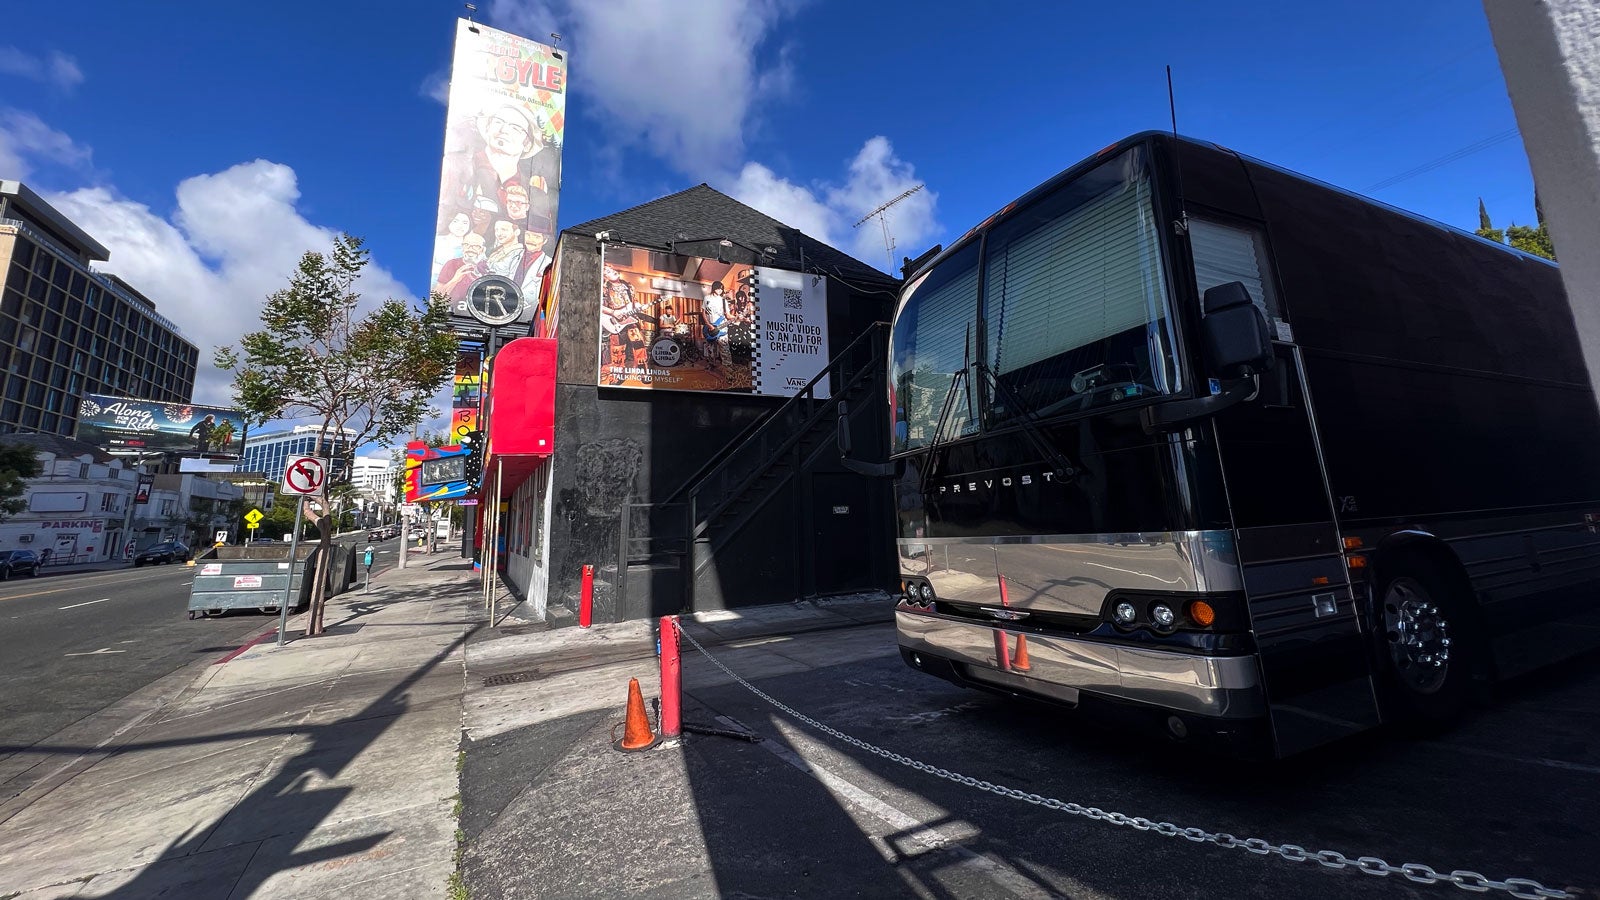 How the World Ran Out of Tour Buses